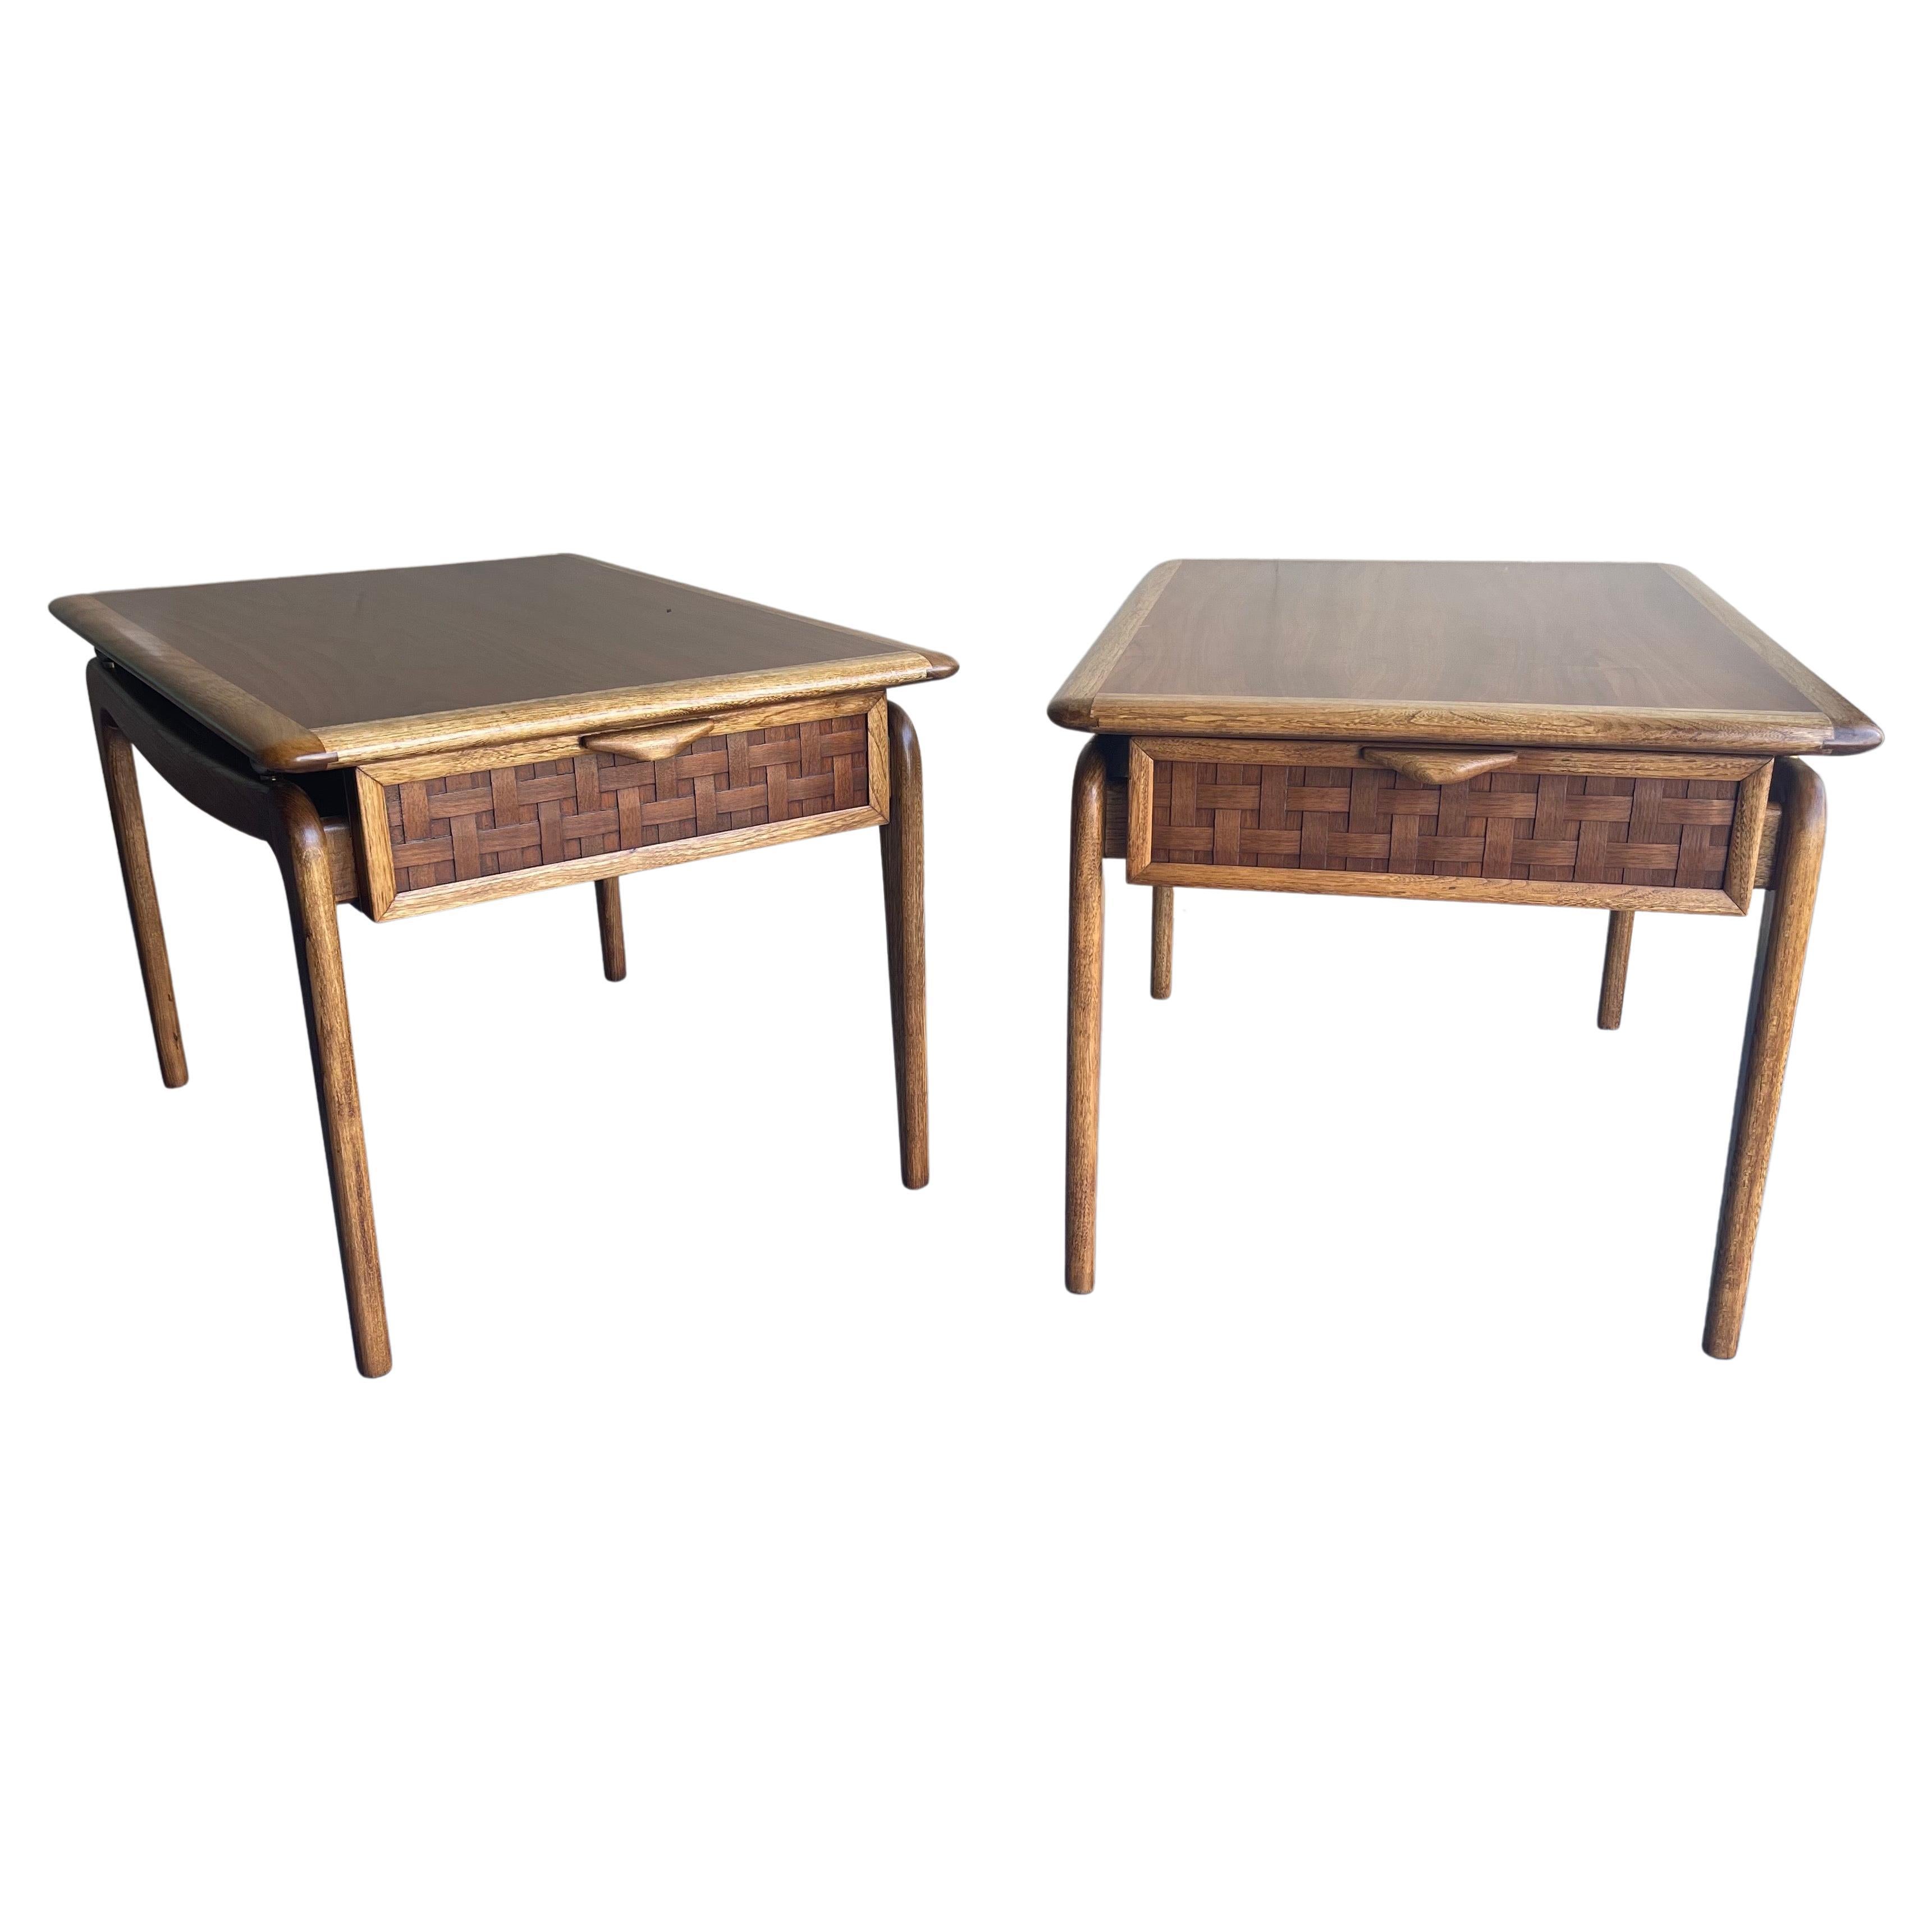 Pair of American Modern Walnut "Perception" Series End Tables by Lane Furniture